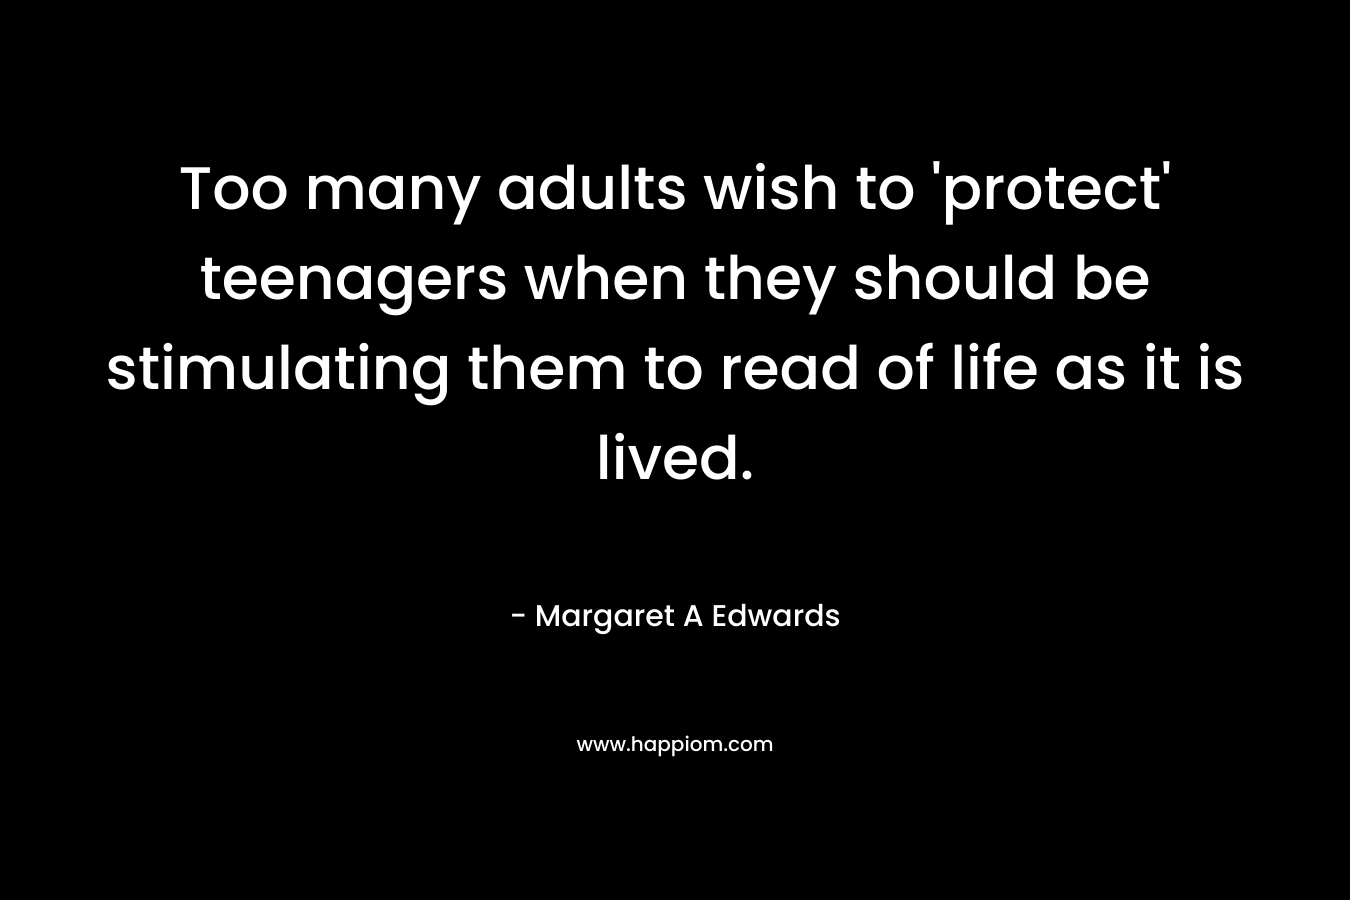 Too many adults wish to ‘protect’ teenagers when they should be stimulating them to read of life as it is lived. – Margaret A Edwards